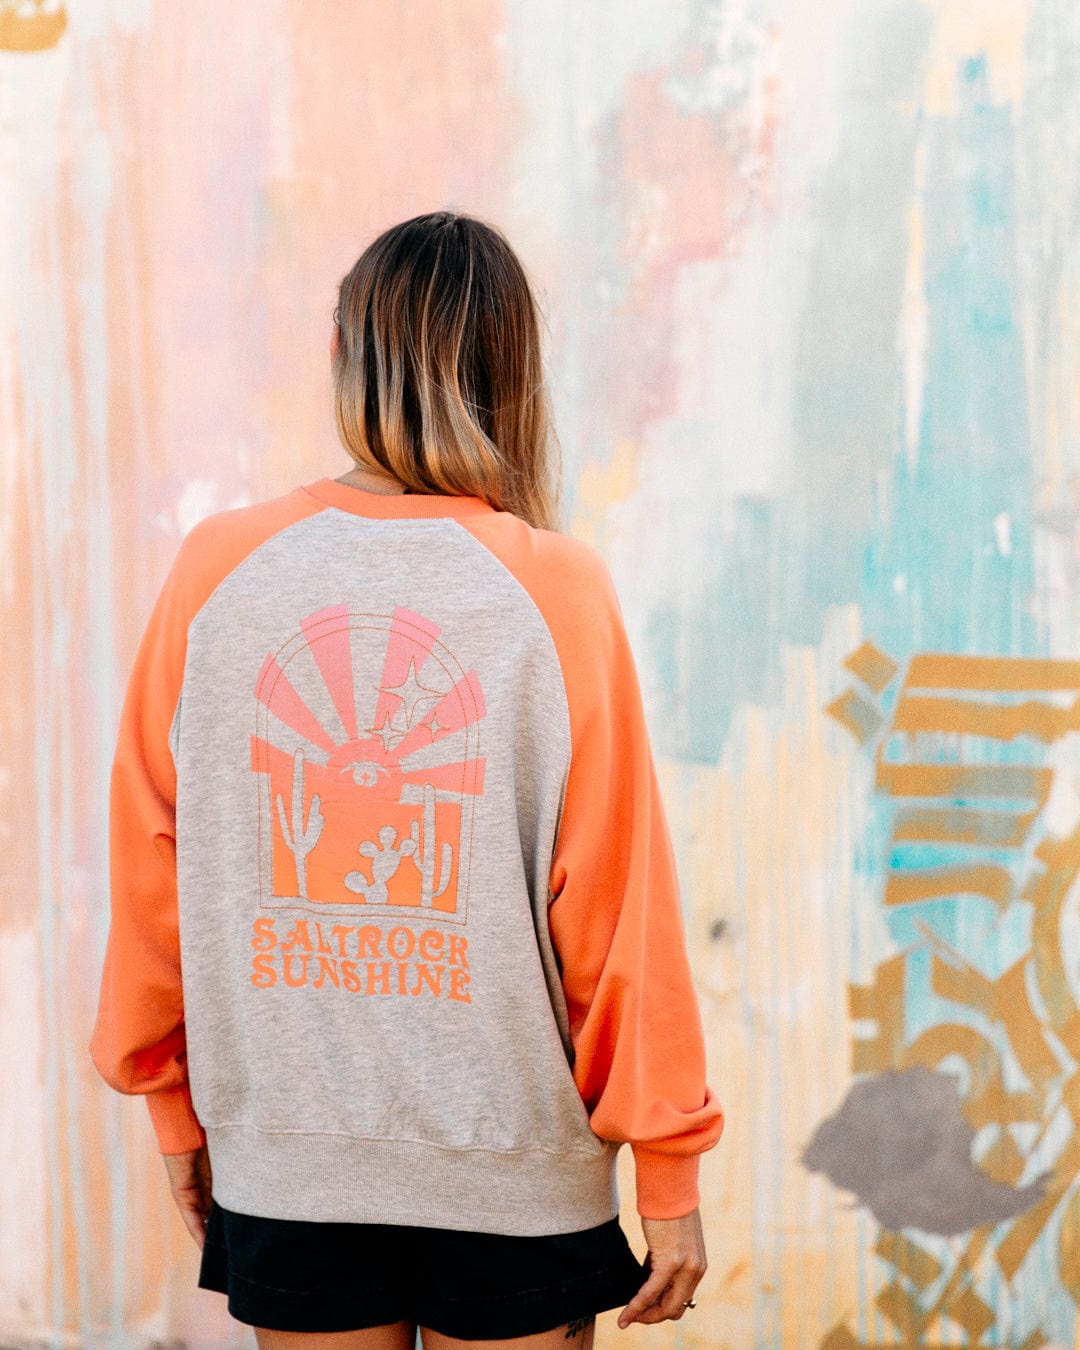 Woman in a Saltrock Sunshine - Womens Raglan Sweat - Grey Marl with raglan sleeves and a graphic design on the back, standing in front of a colorful, abstract mural.